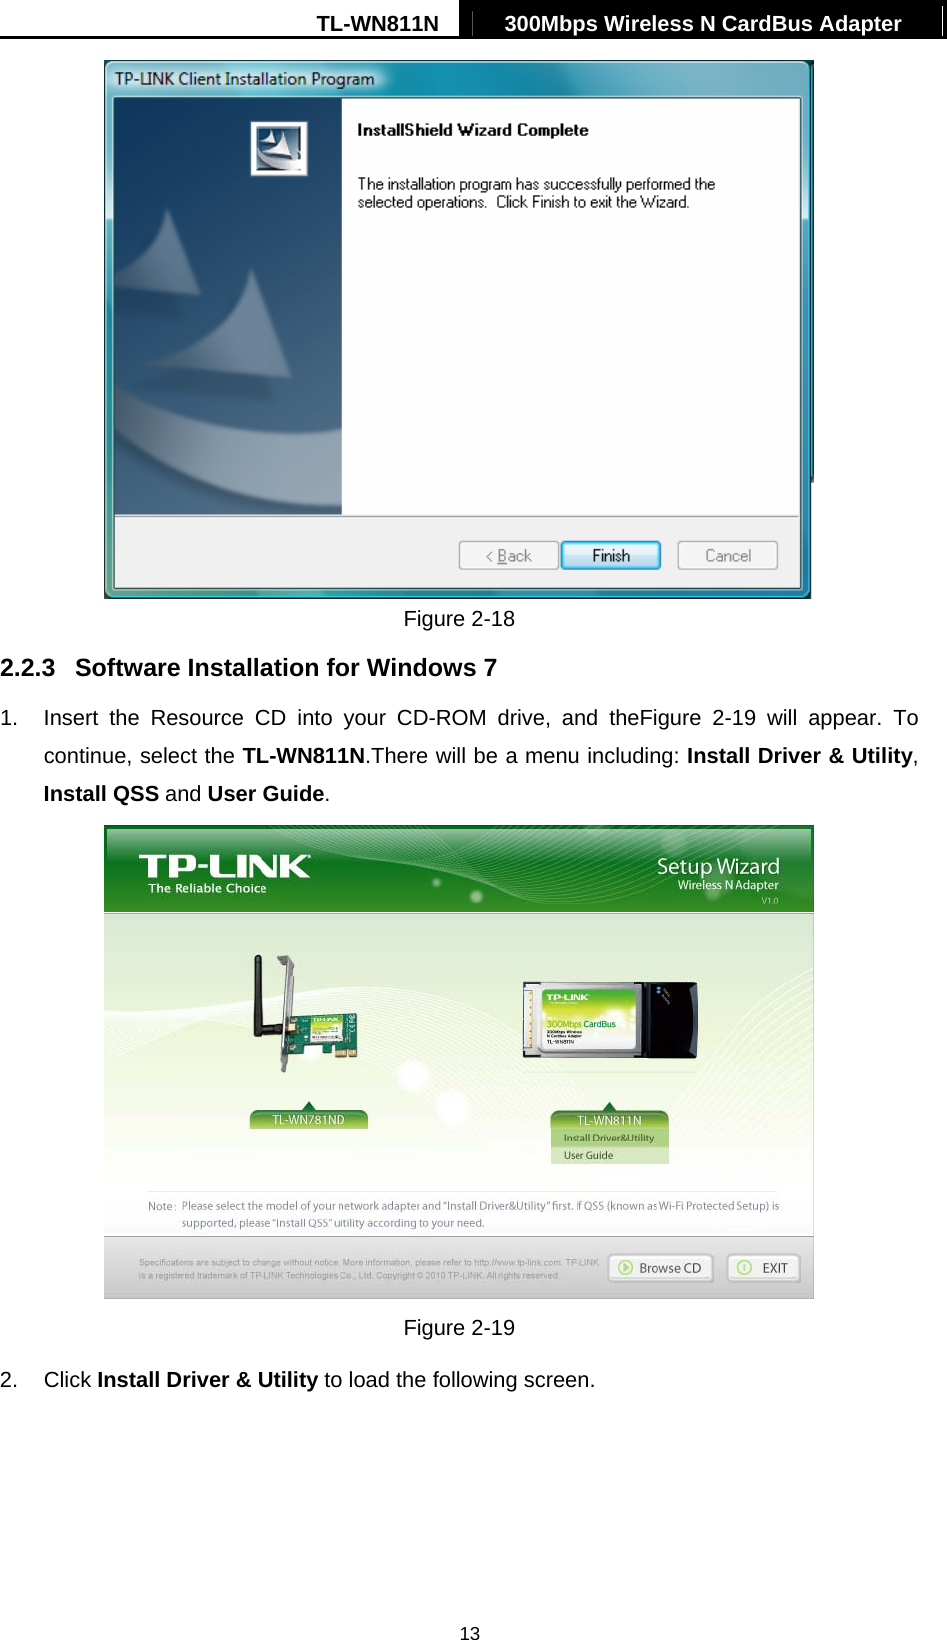 TL-WN811N  300Mbps Wireless N CardBus Adapter   13 Figure 2-18 2.2.3  Software Installation for Windows 7 1.  Insert the Resource CD into your CD-ROM drive, and theFigure 2-19 will appear. To continue, select the TL-WN811N.There will be a menu including: Install Driver &amp; Utility, Install QSS and User Guide.  Figure 2-19 2. Click Install Driver &amp; Utility to load the following screen. 